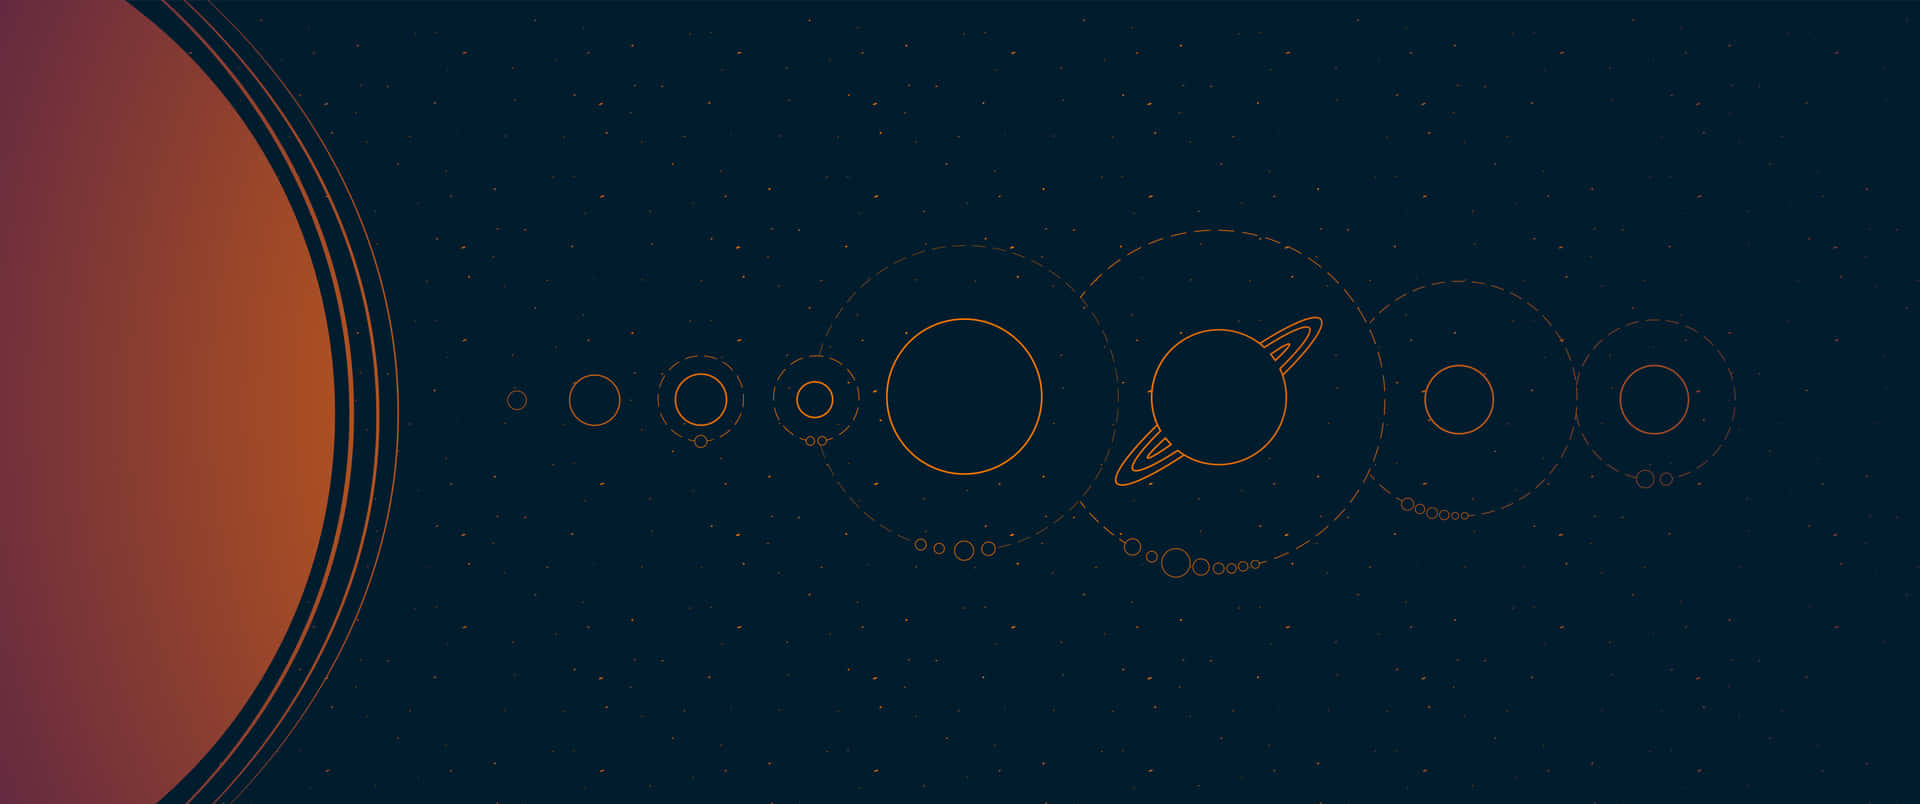 A Diagram Of The Solar System With The Planets And Moons Wallpaper